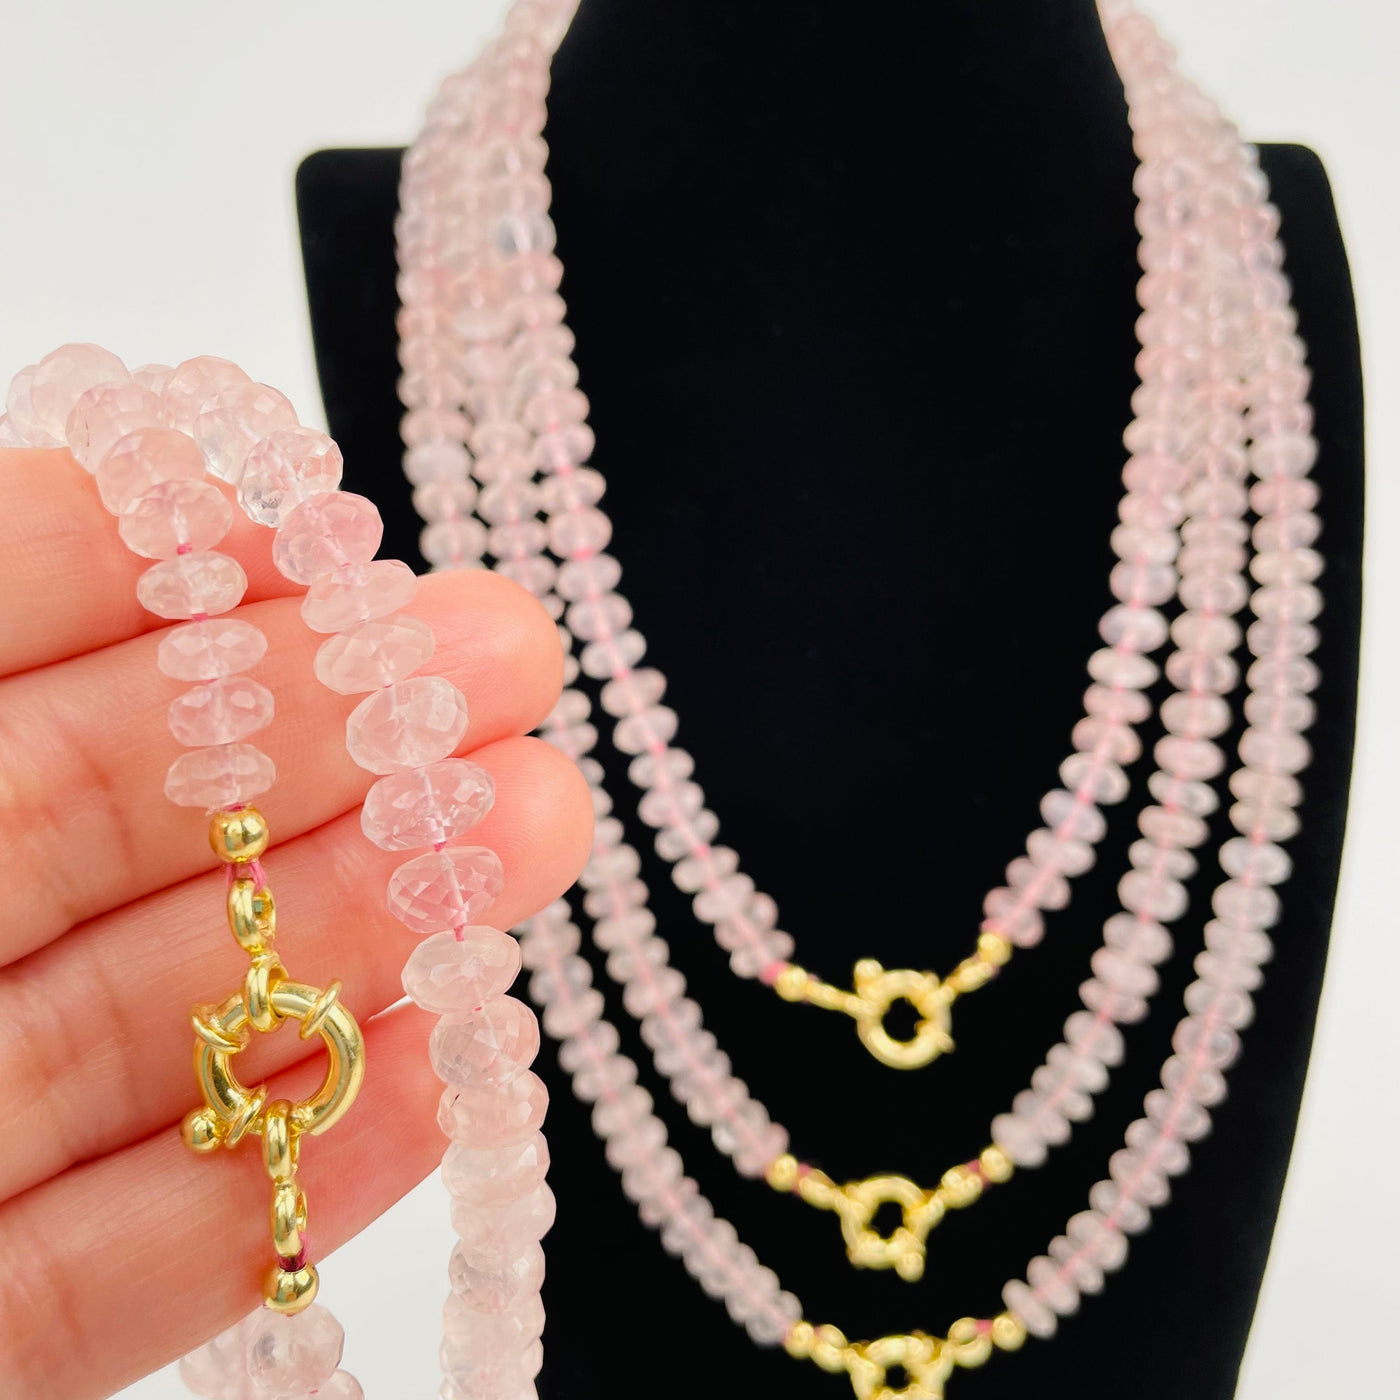 rose quartz candy necklace in hand for size reference 